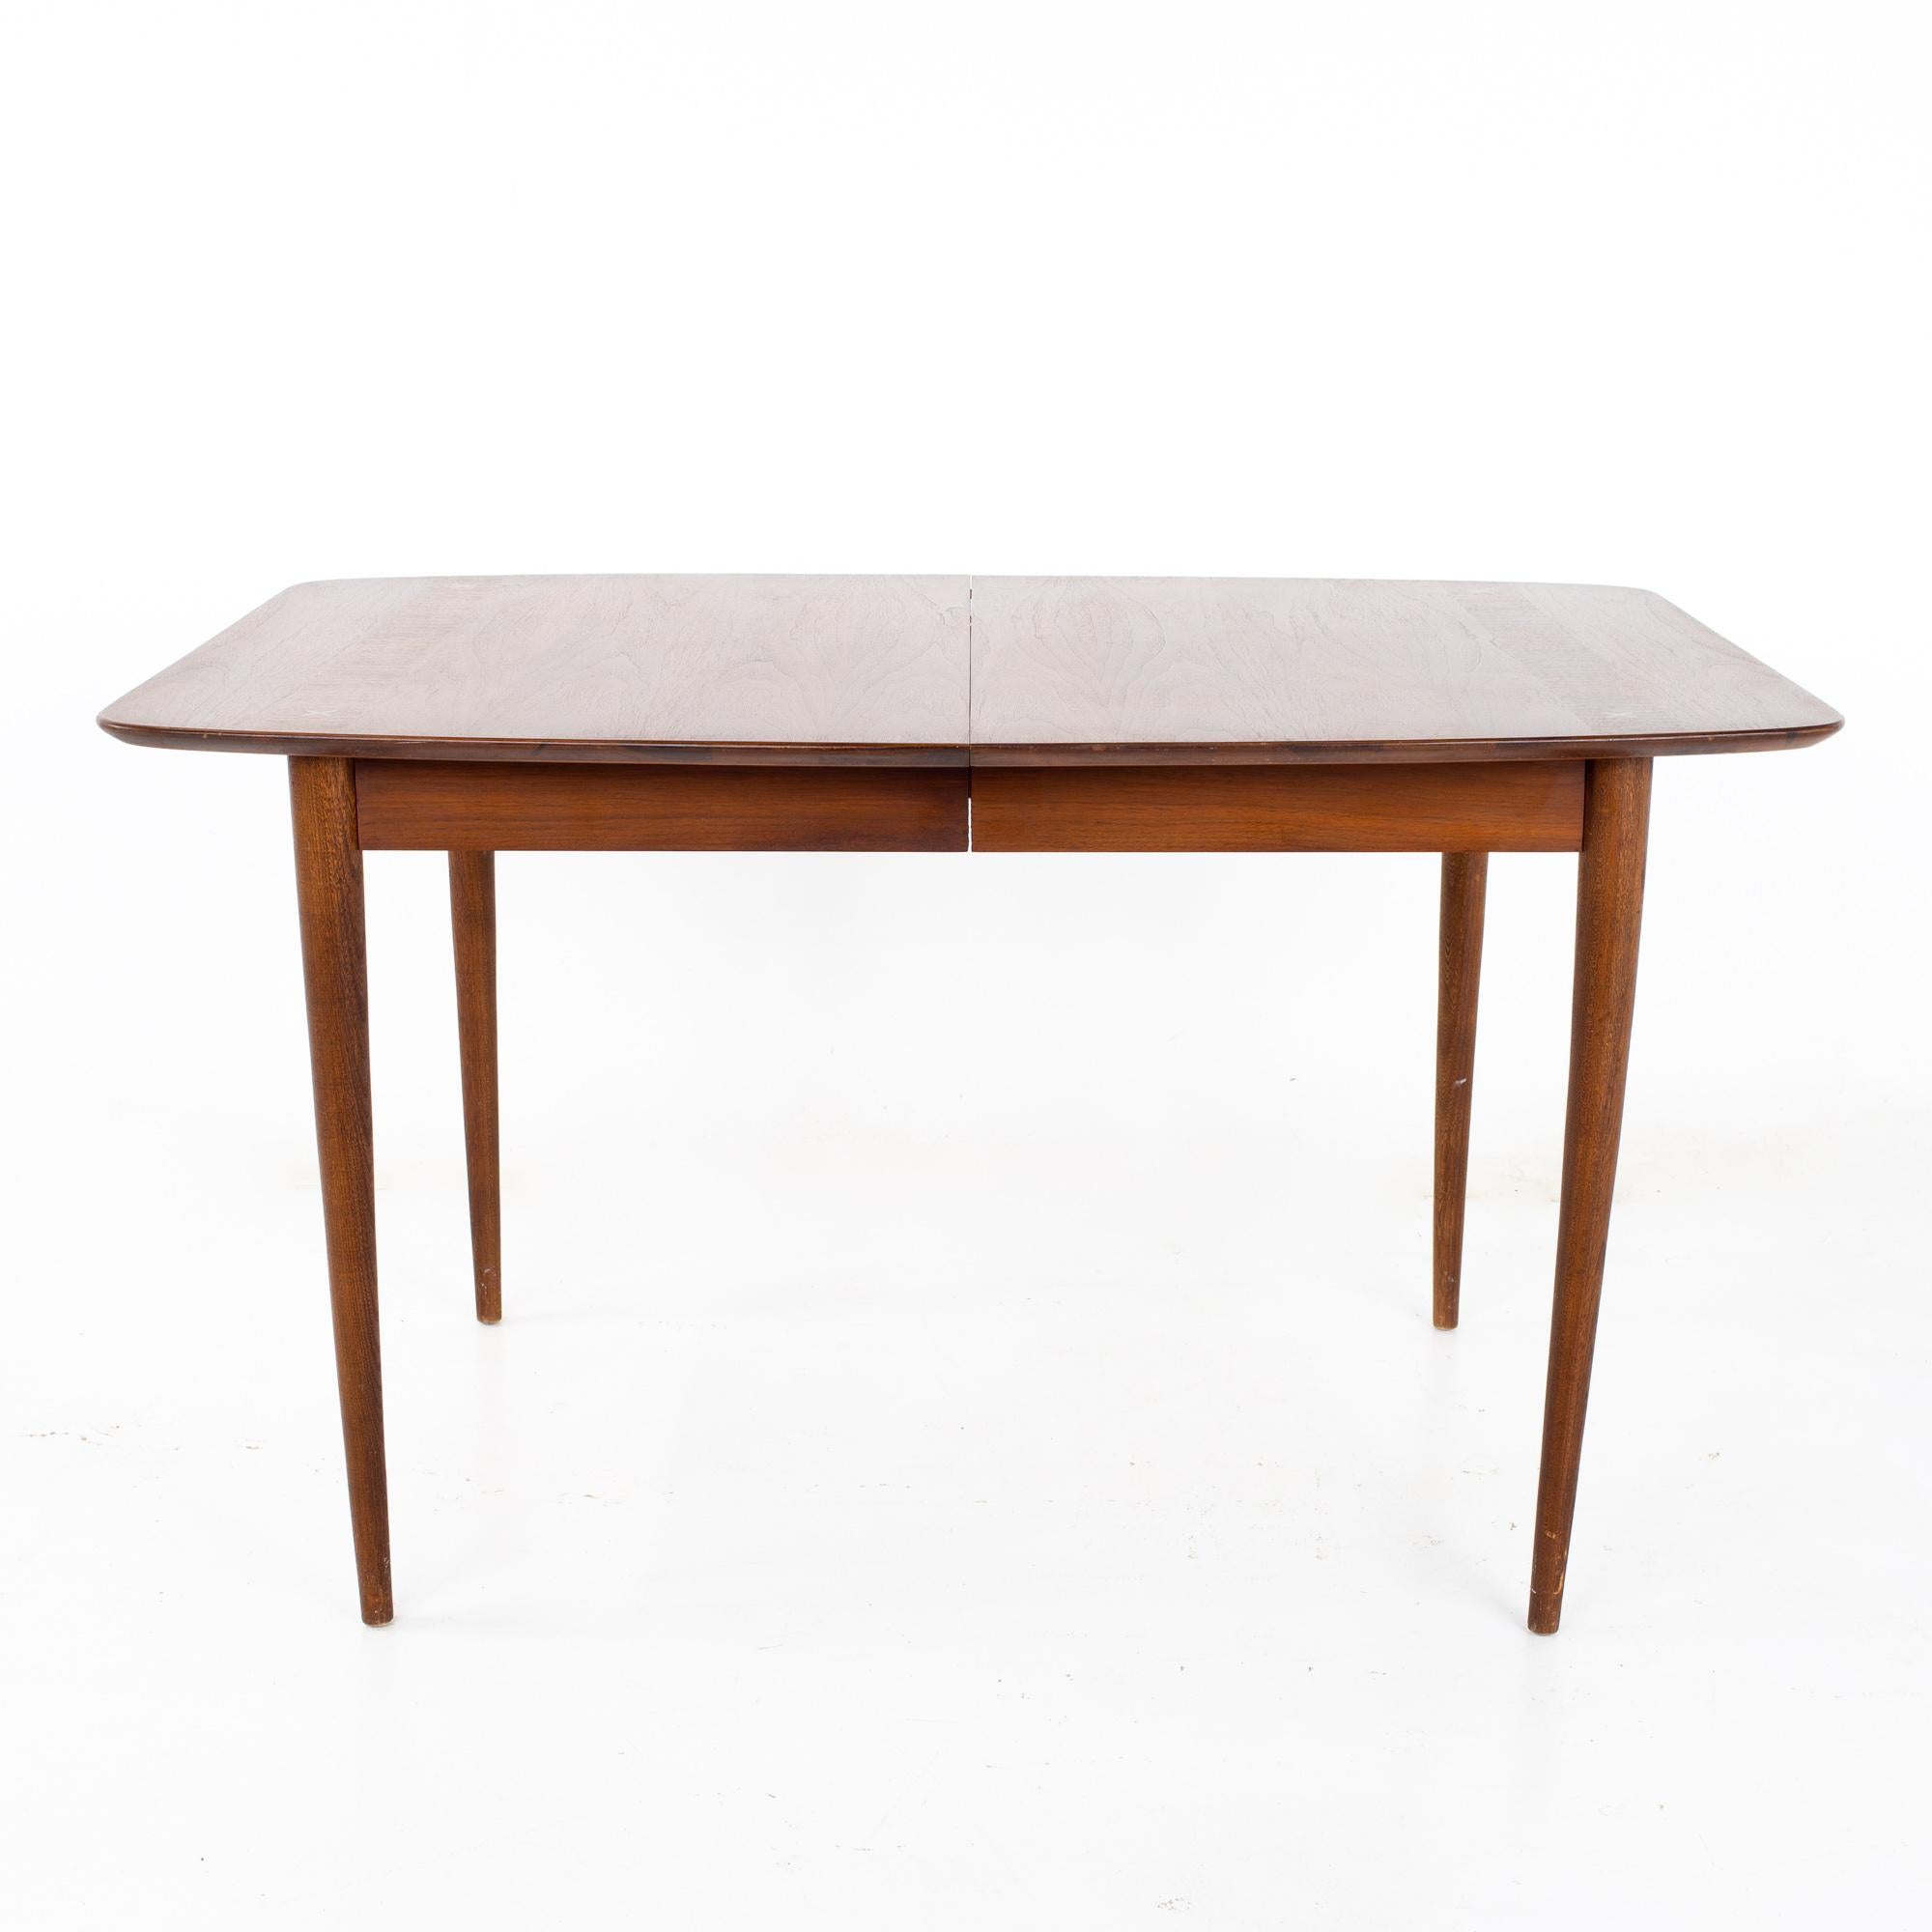 Merton Gershun for American of Martinsville Dania mid century dining table

Table measures: 52 wide x 36 deep x 29.75 inches high; each leaf is 12 inches wide, making a maximum table width of 76 inches when both leaves are used

?All pieces of